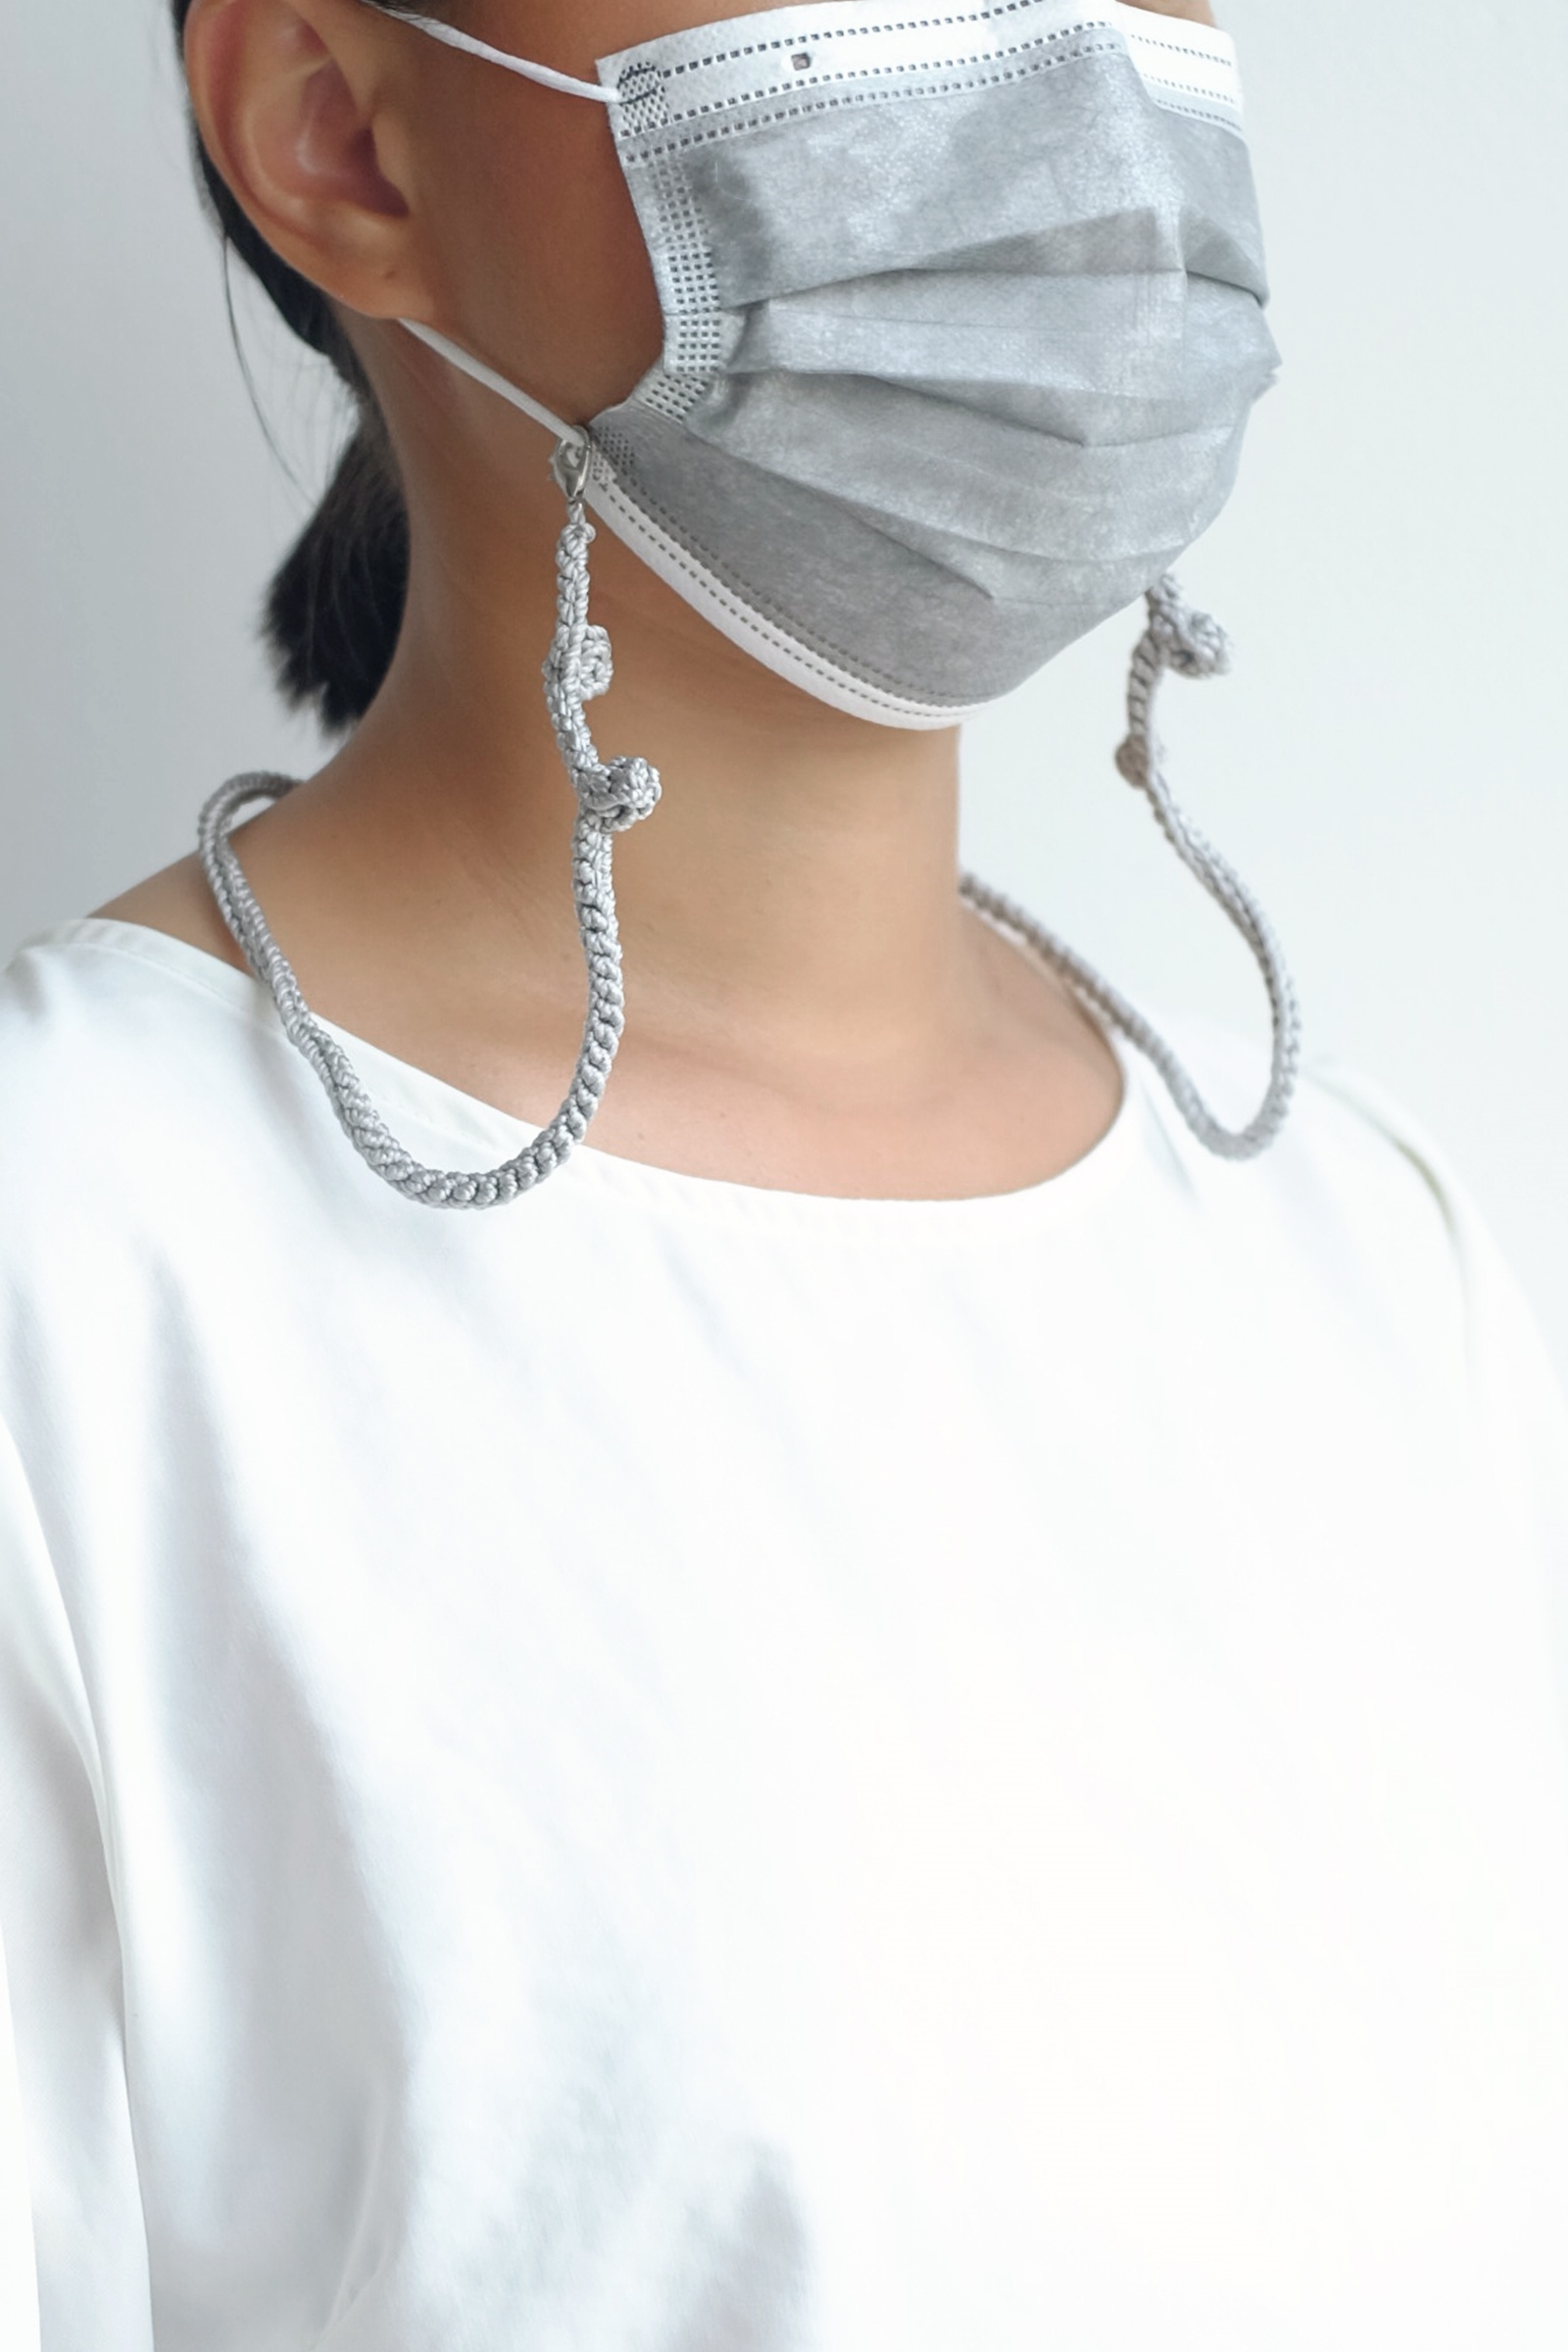 Picture of Handmade Crochet Mask Strap Grey